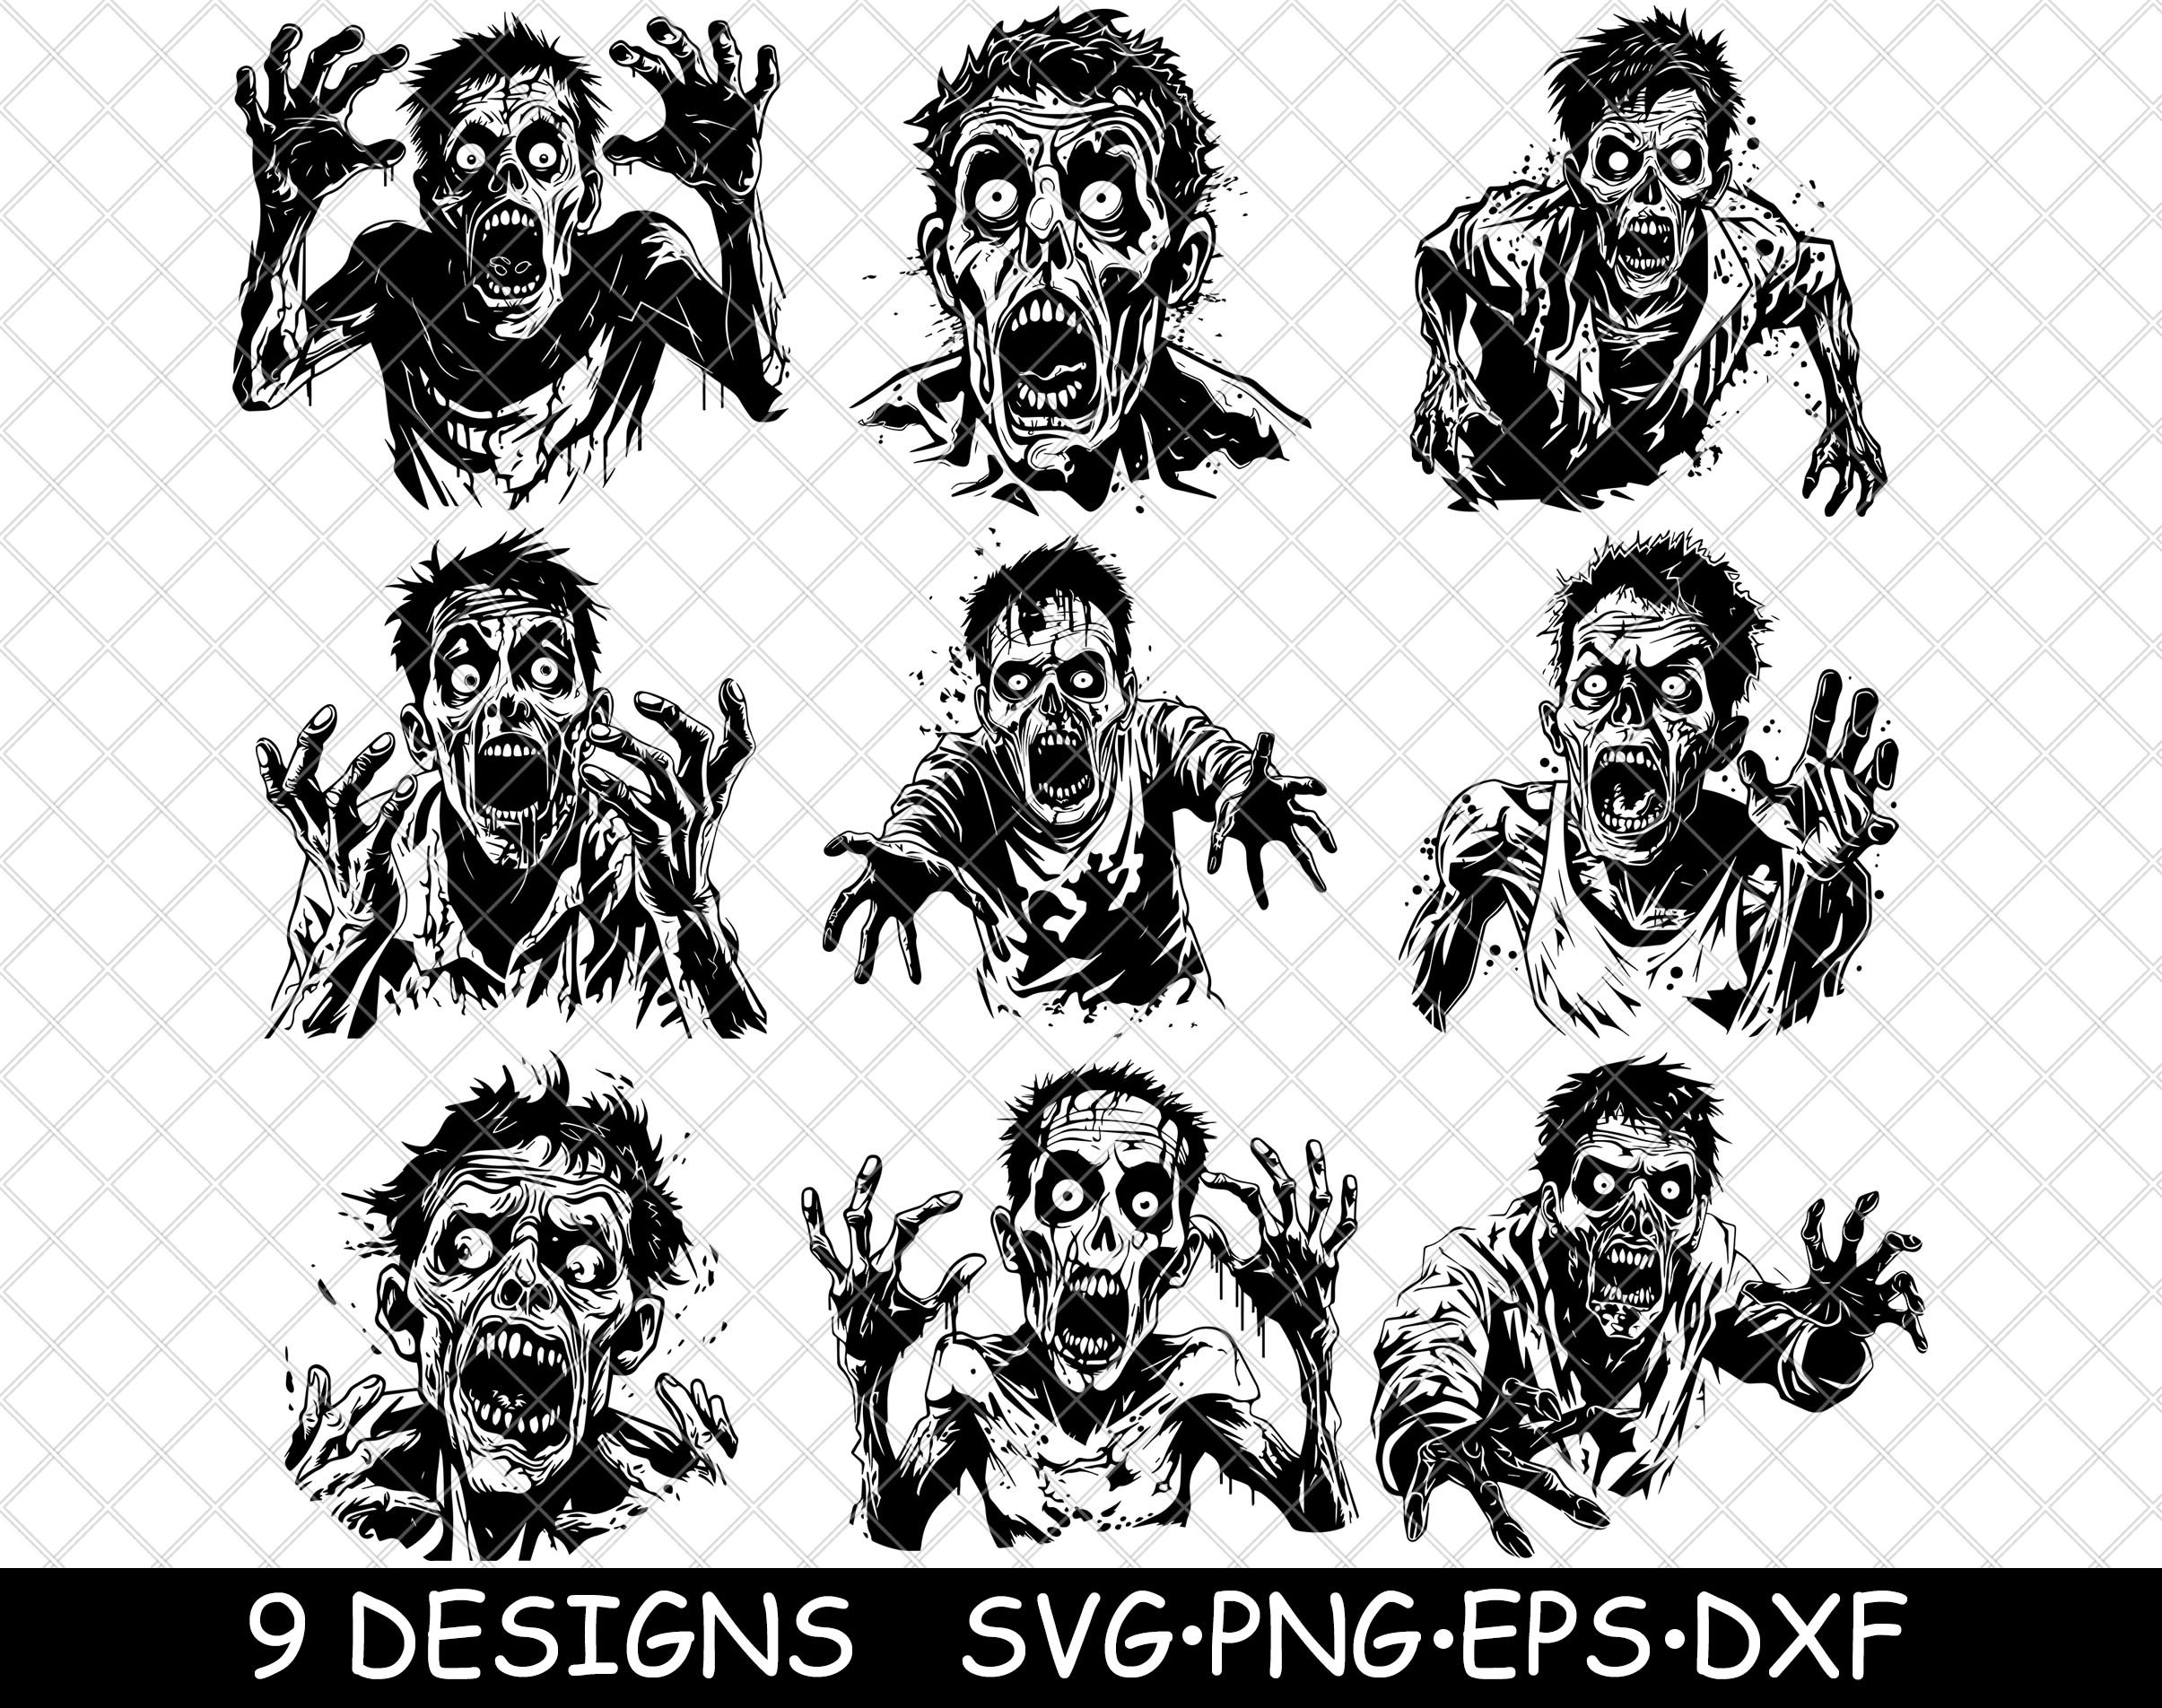 50 years of zombies: Designing the undead to explain the living